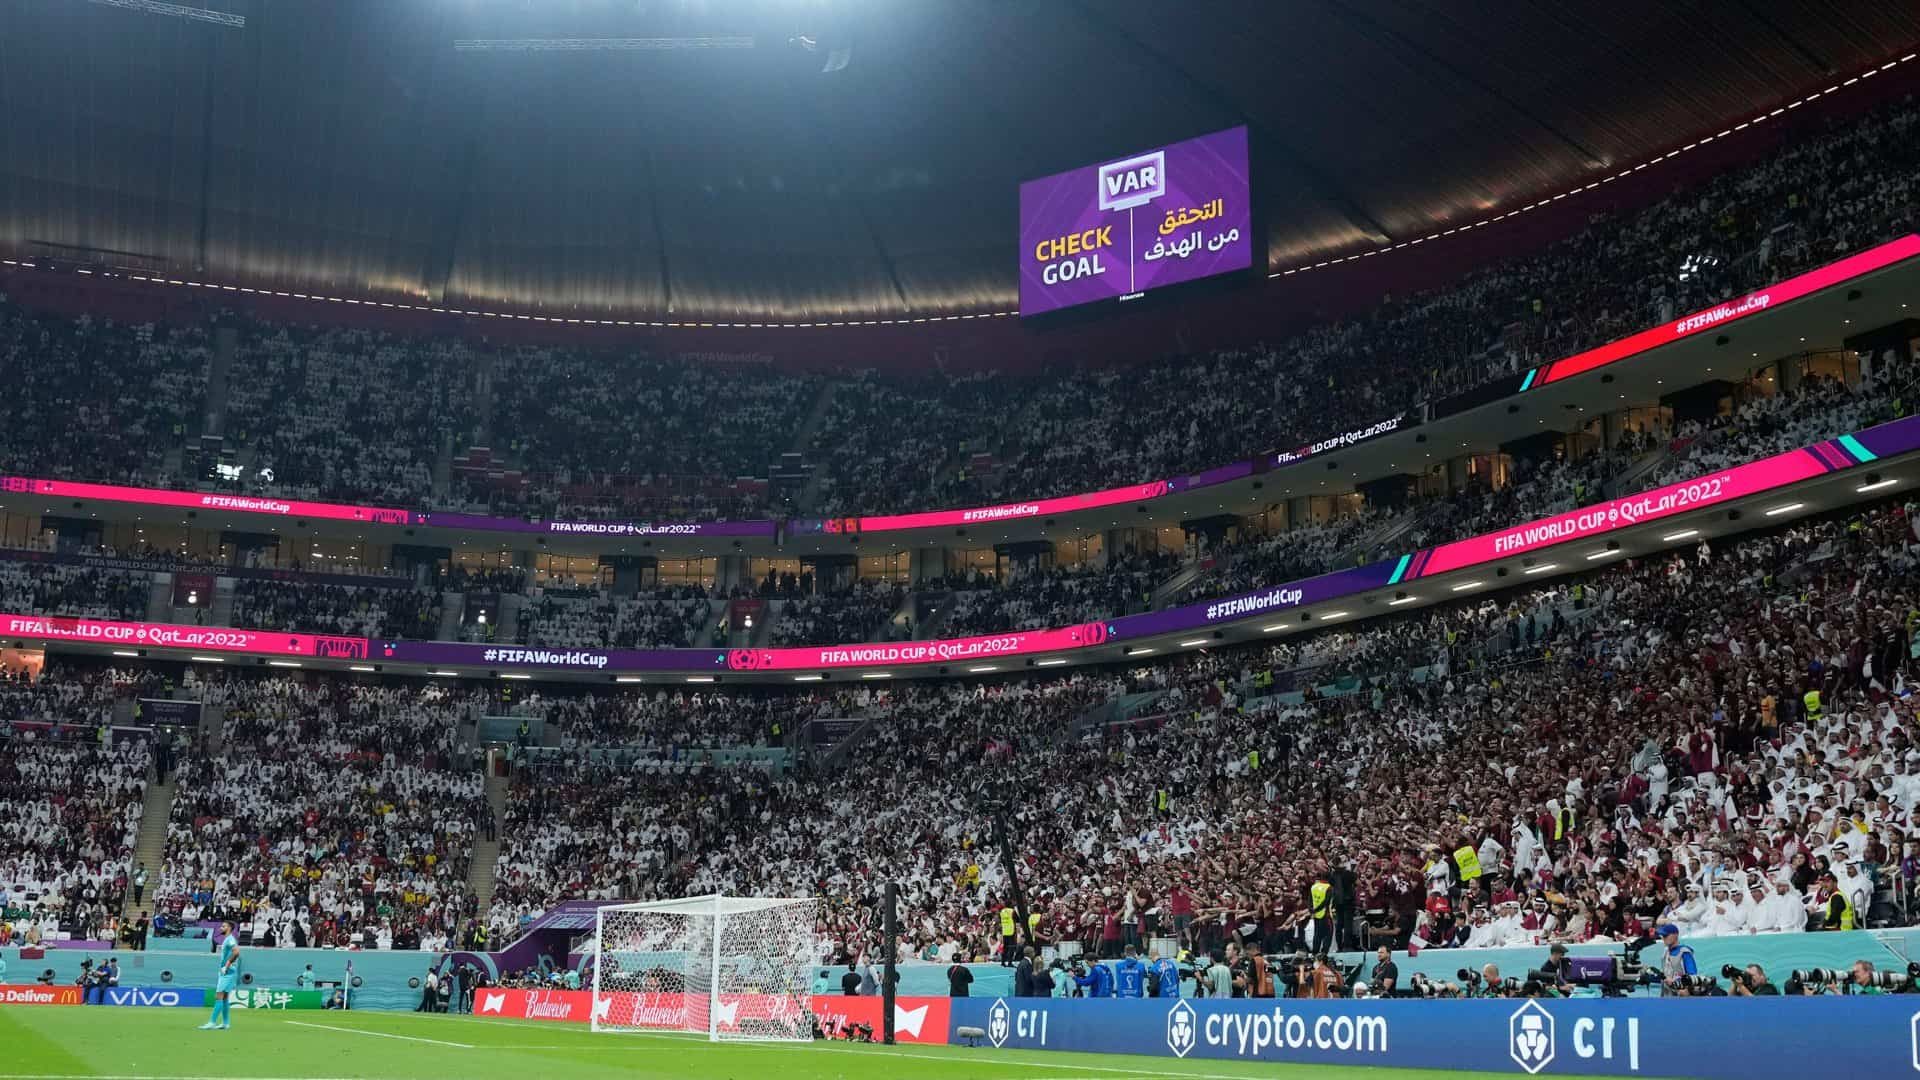 The 2022 World Cup in Qatar opens with a VAR check on the big screen, because of course it does